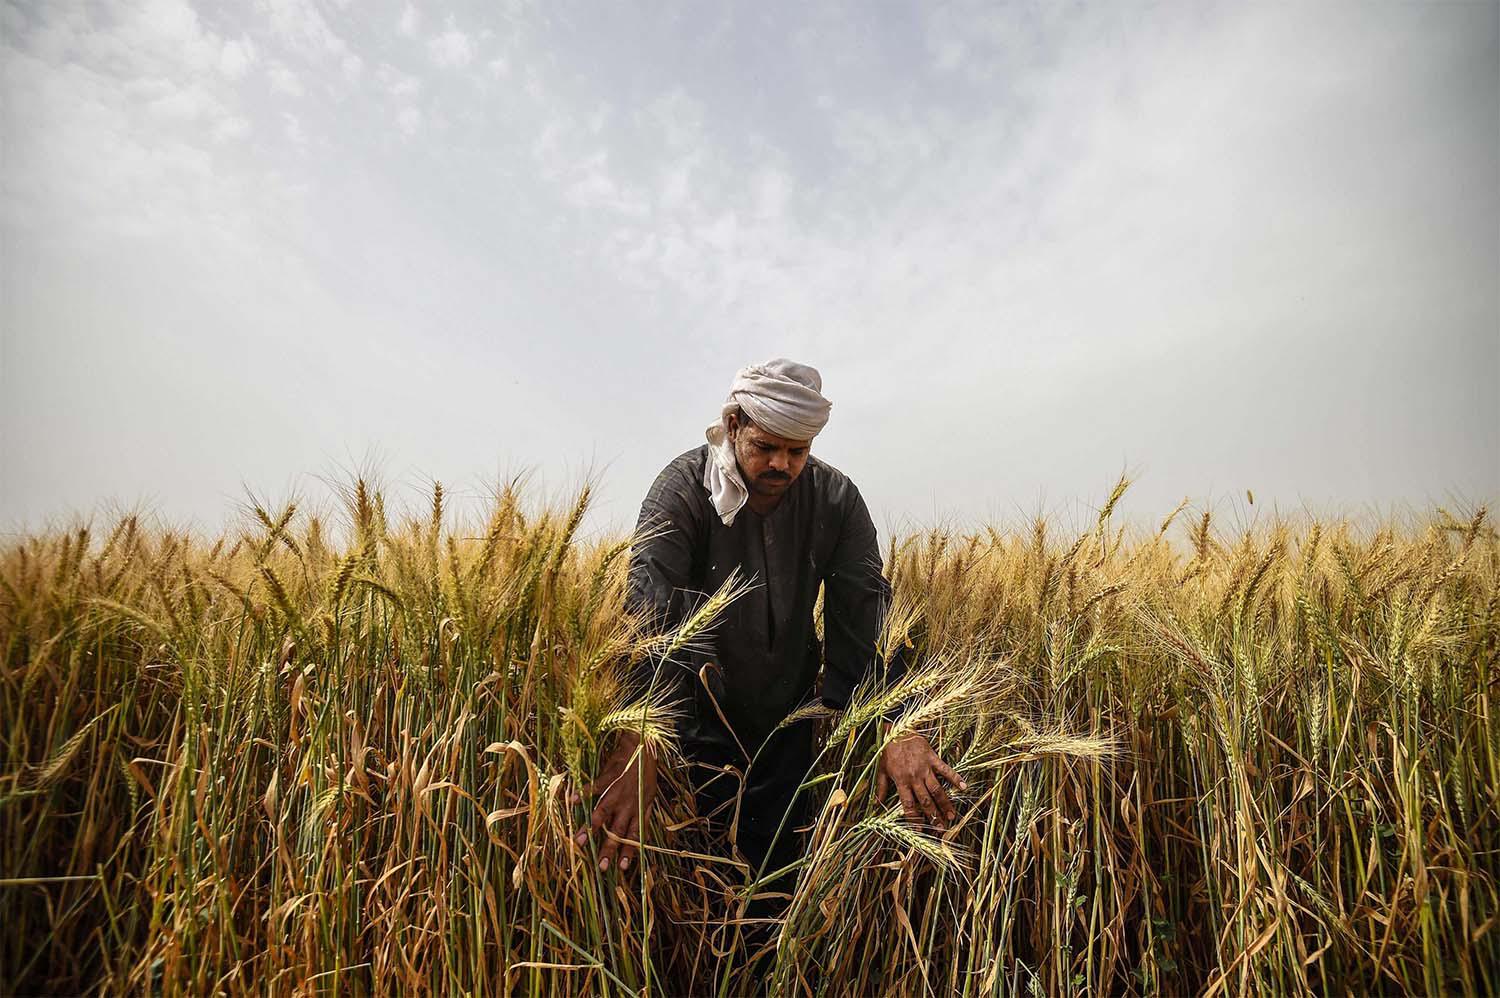 An Egyptian man harvests wheat in Saqiyat al-Manqadi village in the northern Nile Delta province of Menoufia in Egypt